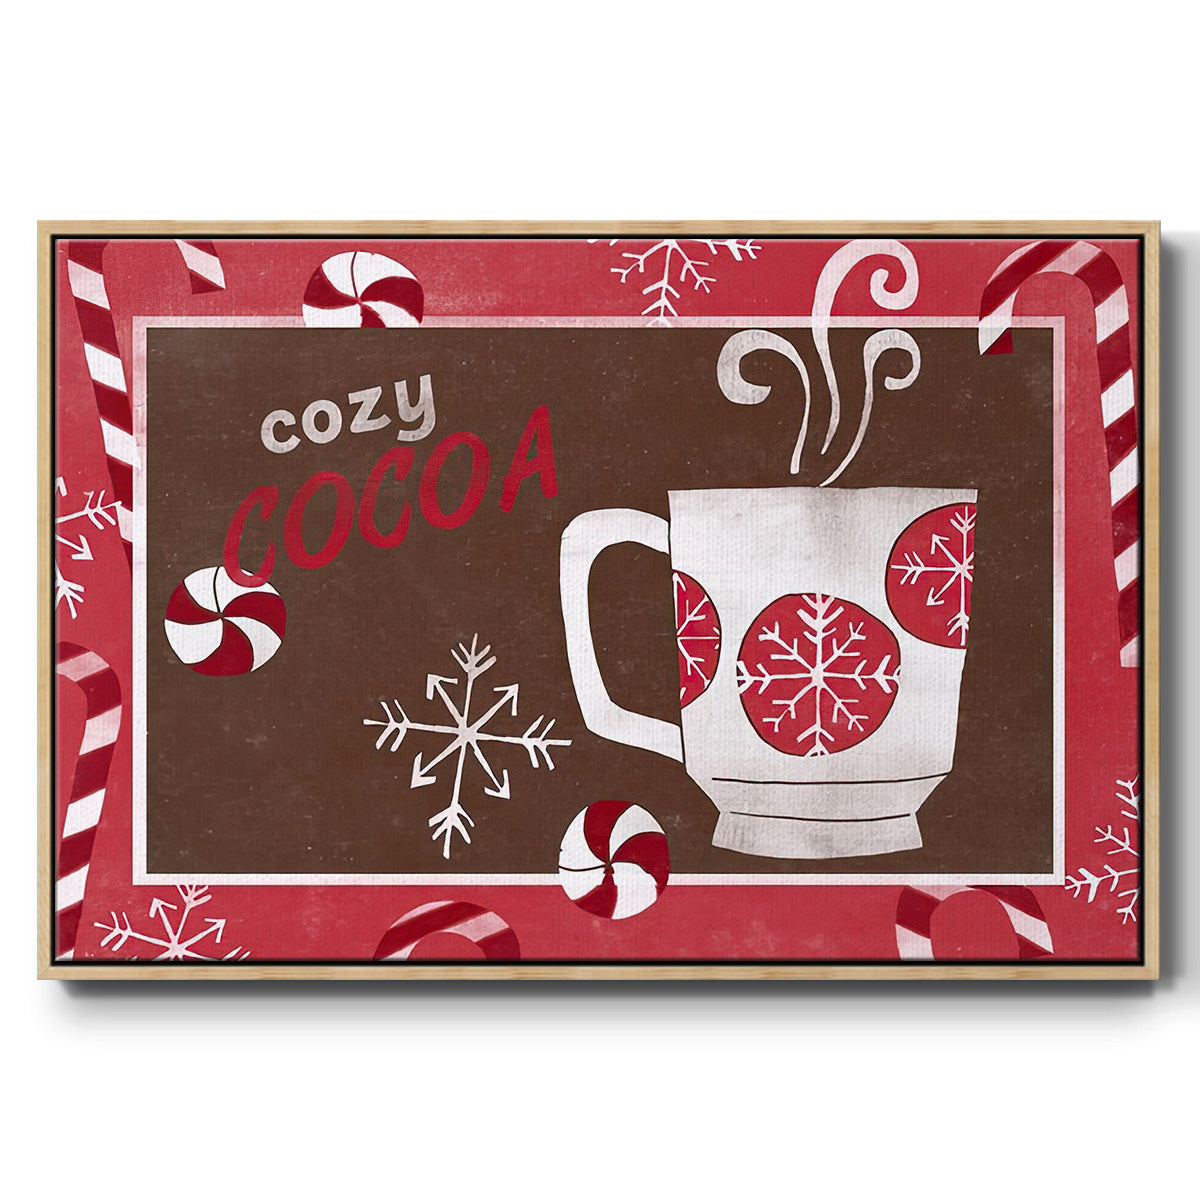 Cozy Cocoa Christmas Collection A - Framed Gallery Wrapped Canvas in Floating Frame